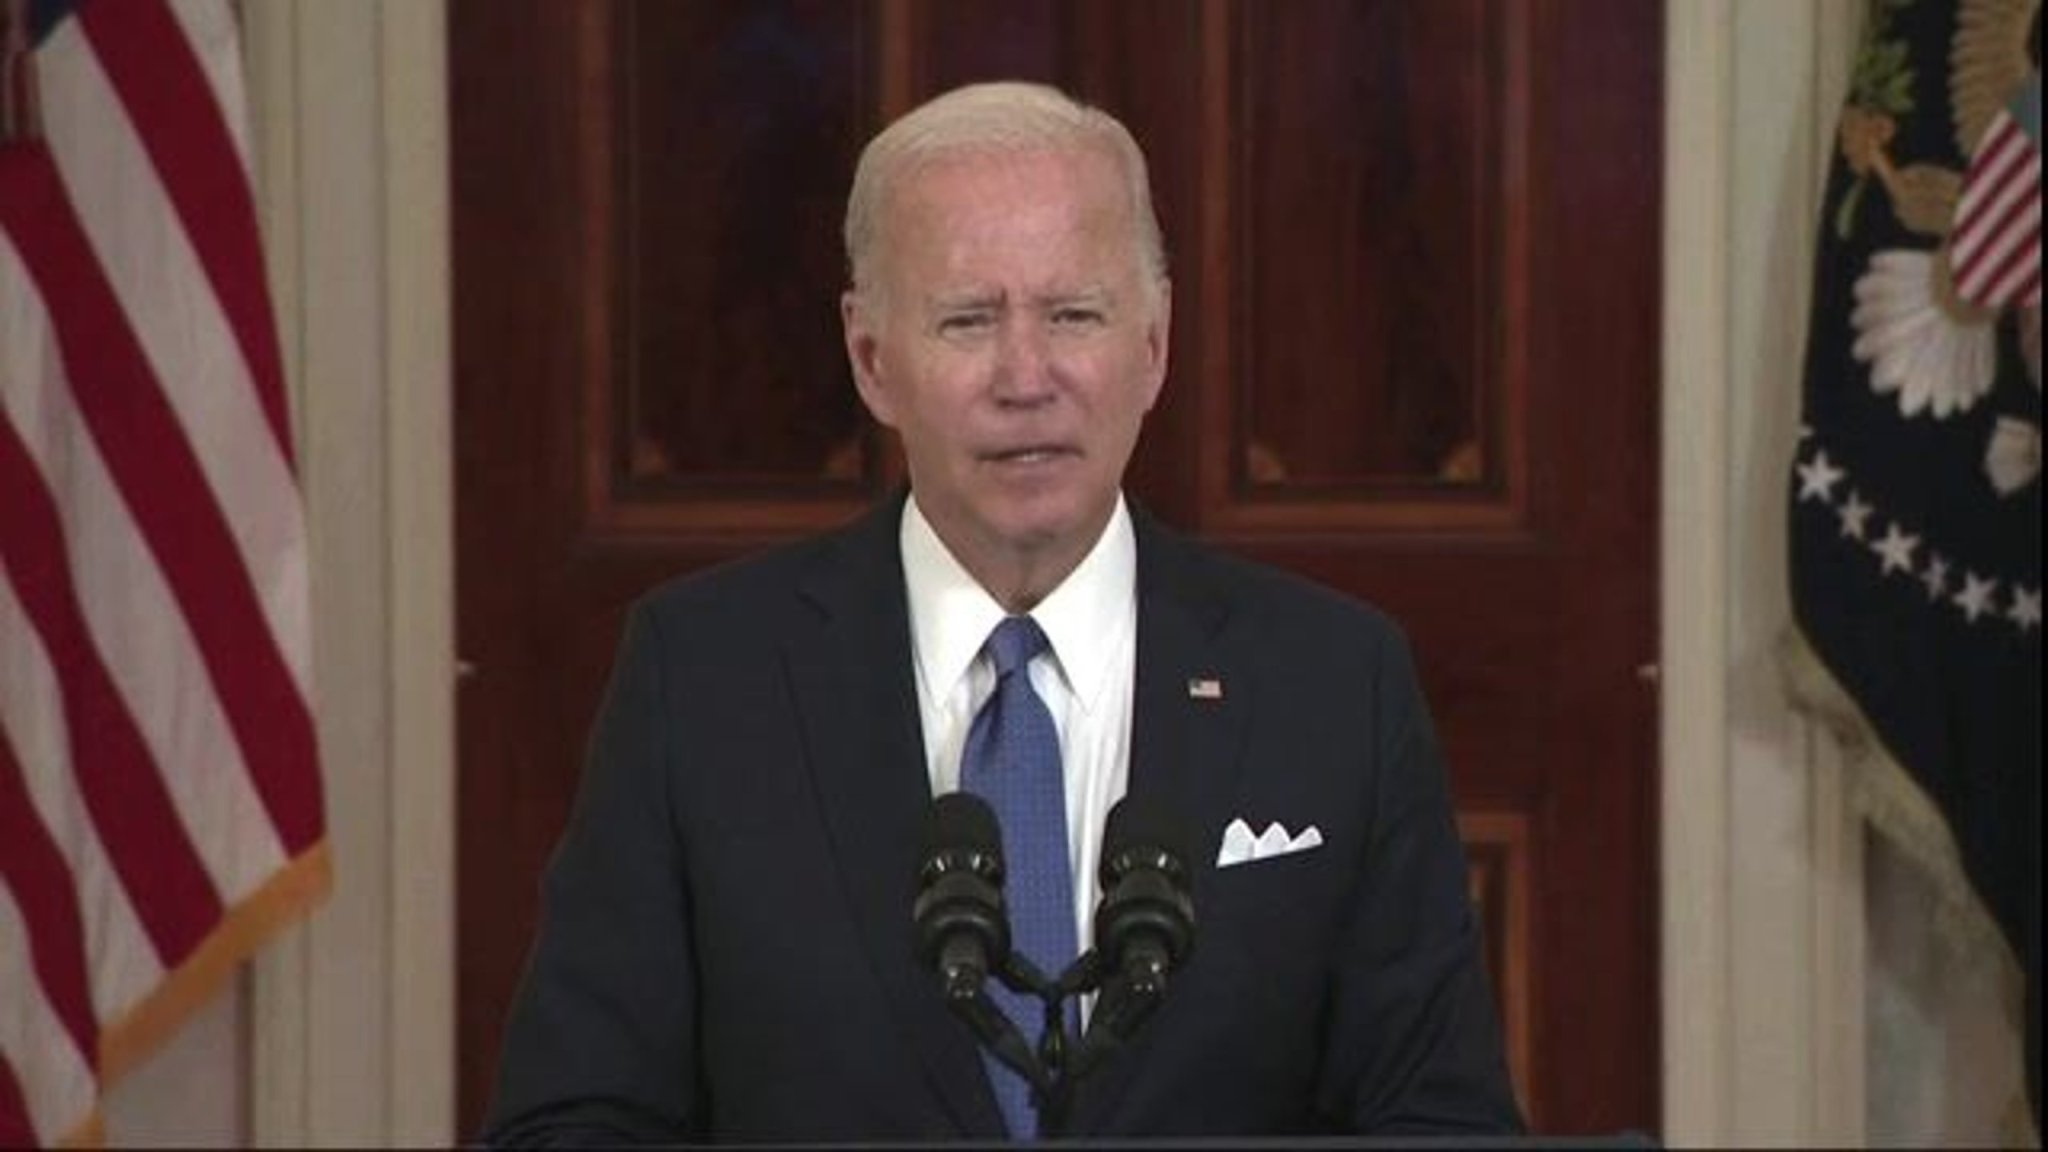 President Biden condemns the Supreme Court's “extreme” ruling overturning Roe v. Wade.